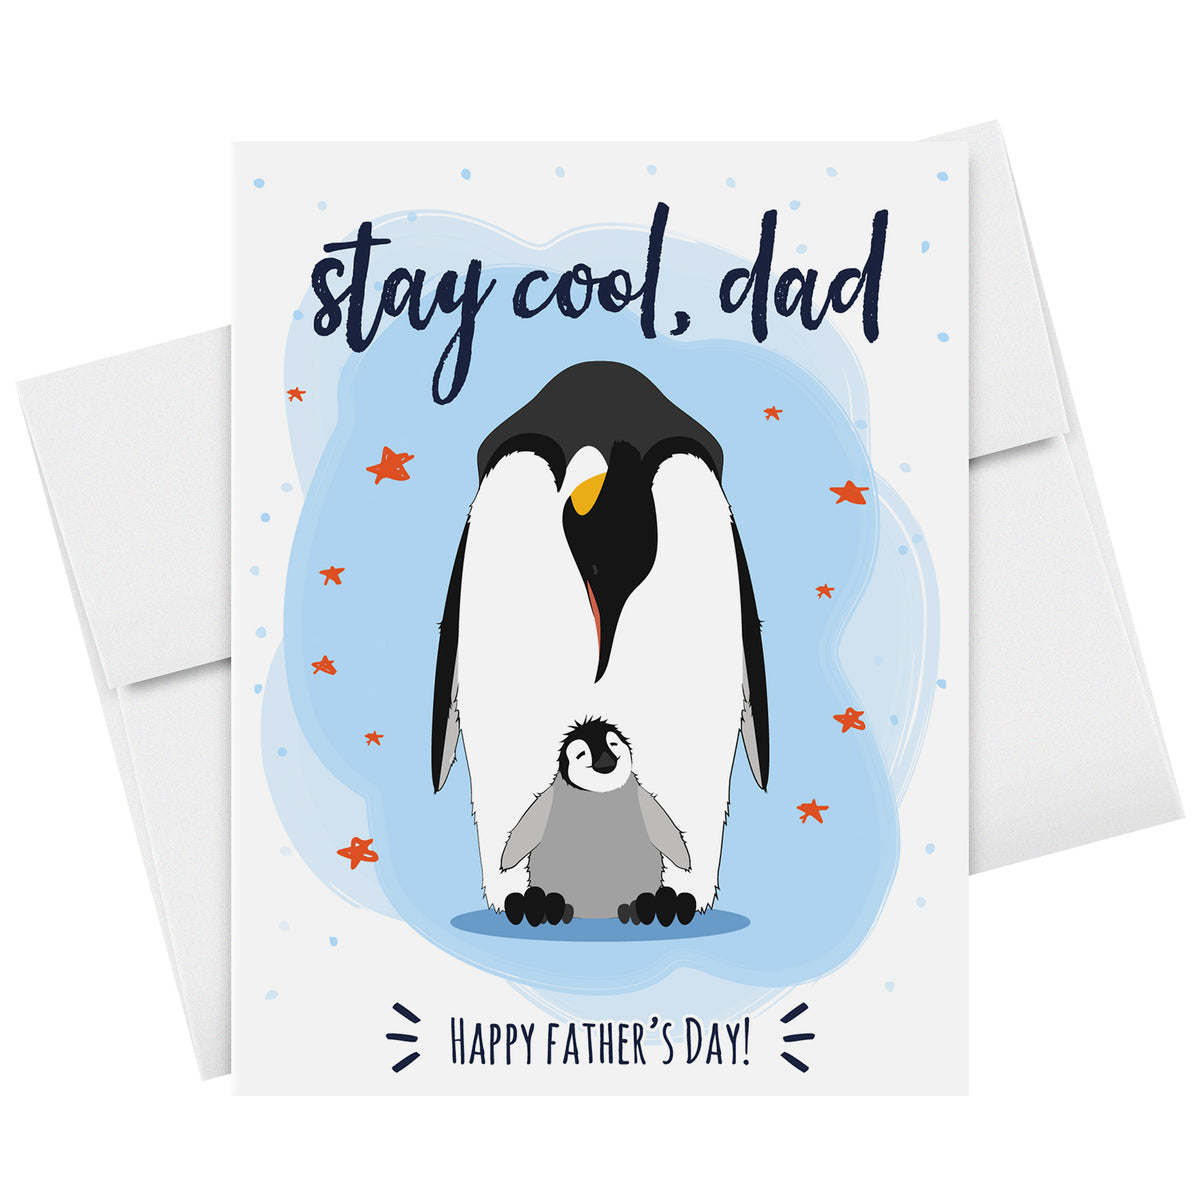 Stay Cool, Dad! Happy Father's Day Greeting Cards and Envelopes for Dad, Stepdad | 4.25 x 5.5 | 10 per Pack